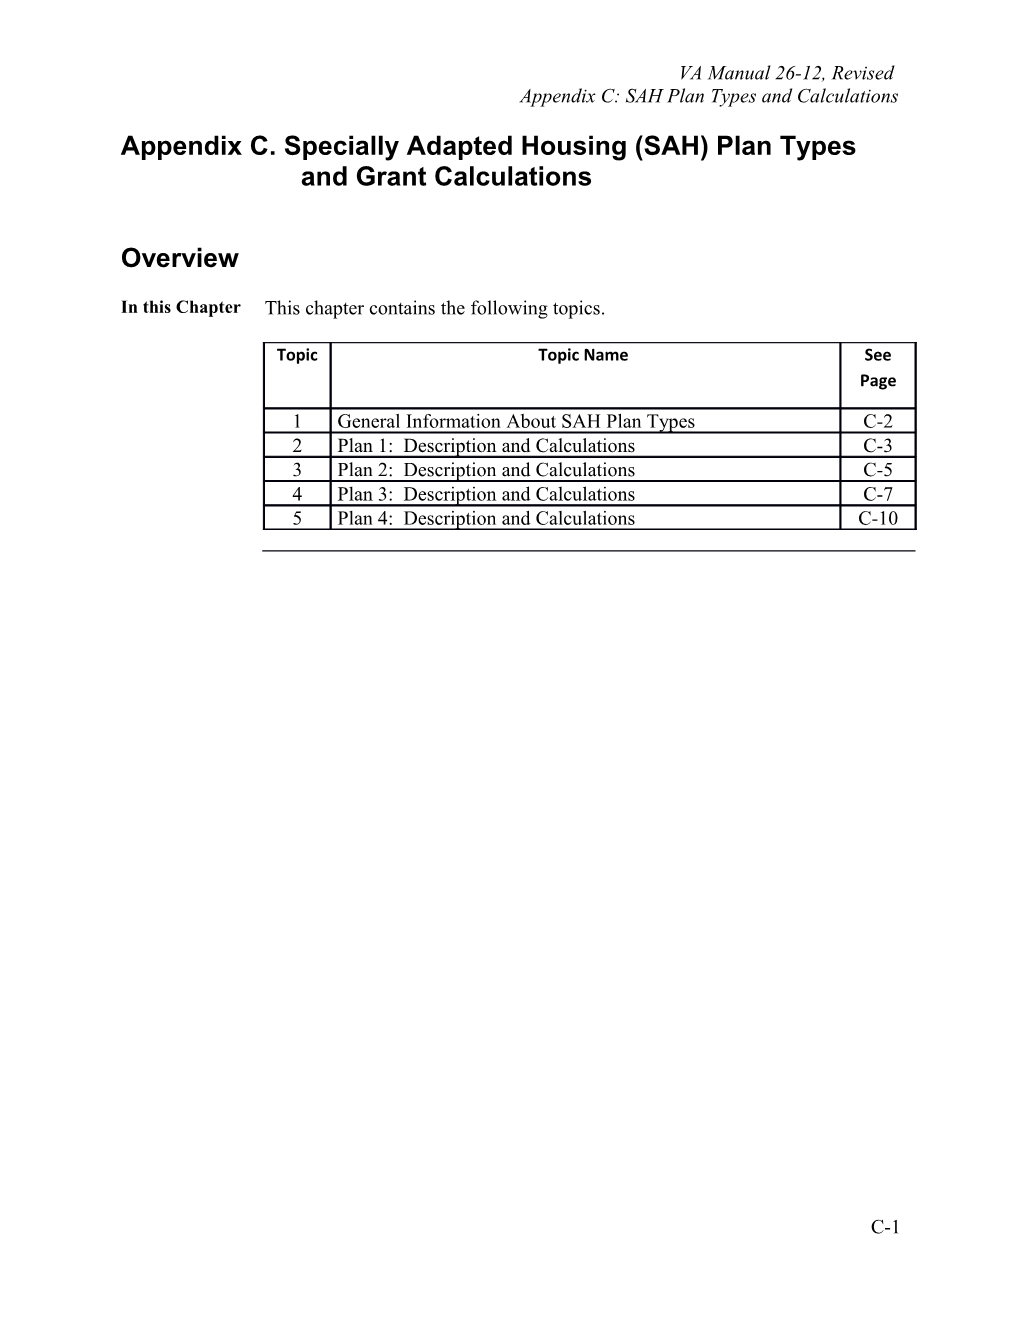 Appendix C. Specially Adapted Housing (SAH) Plan Types and Grant Calculations